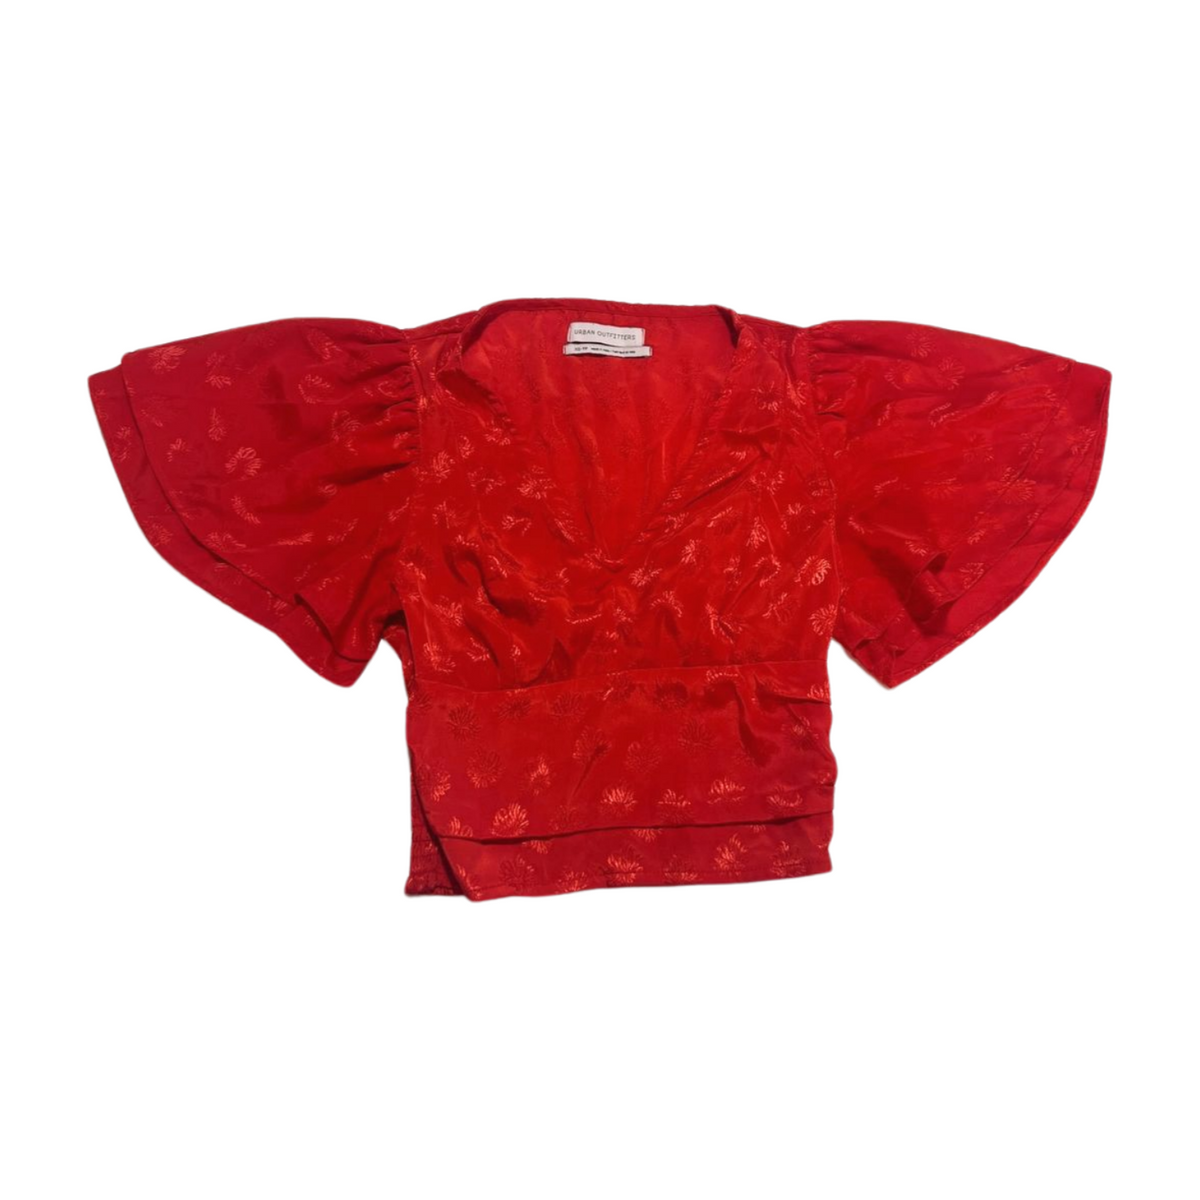 Urban Outfitters- Red Blouse Crop Top